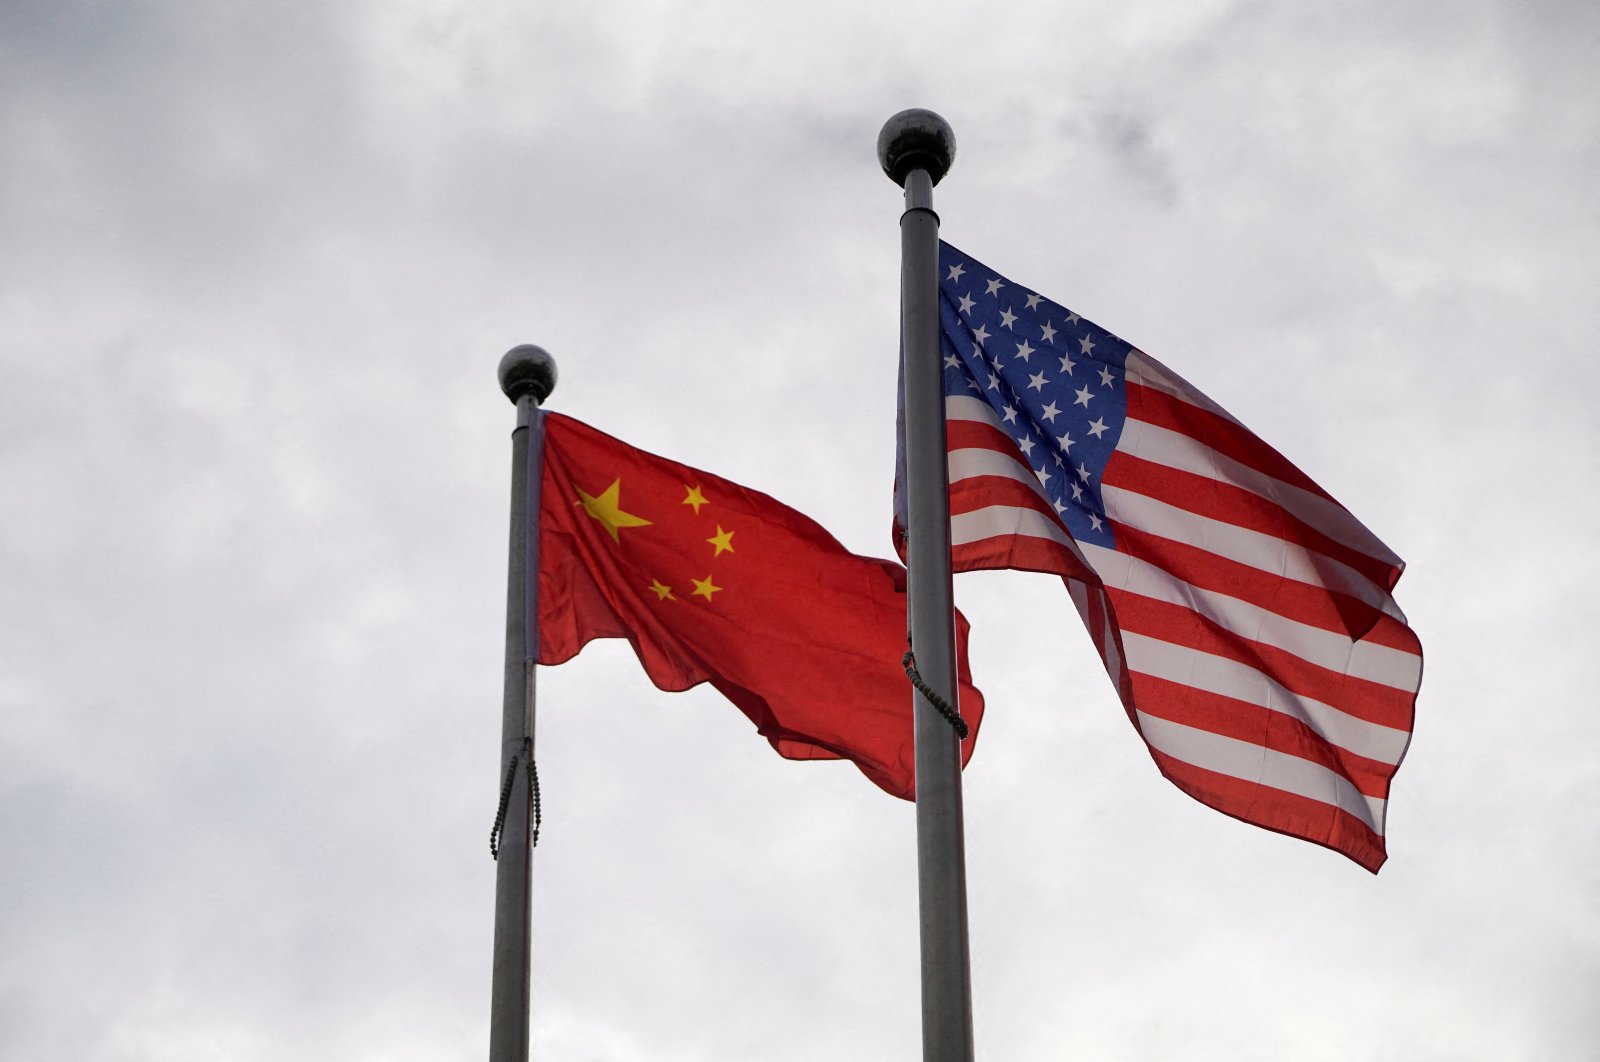 Chinese and U.S. flags flutter outside a company building in Shanghai, China, Nov. 16, 2021. (Reuters Photo)